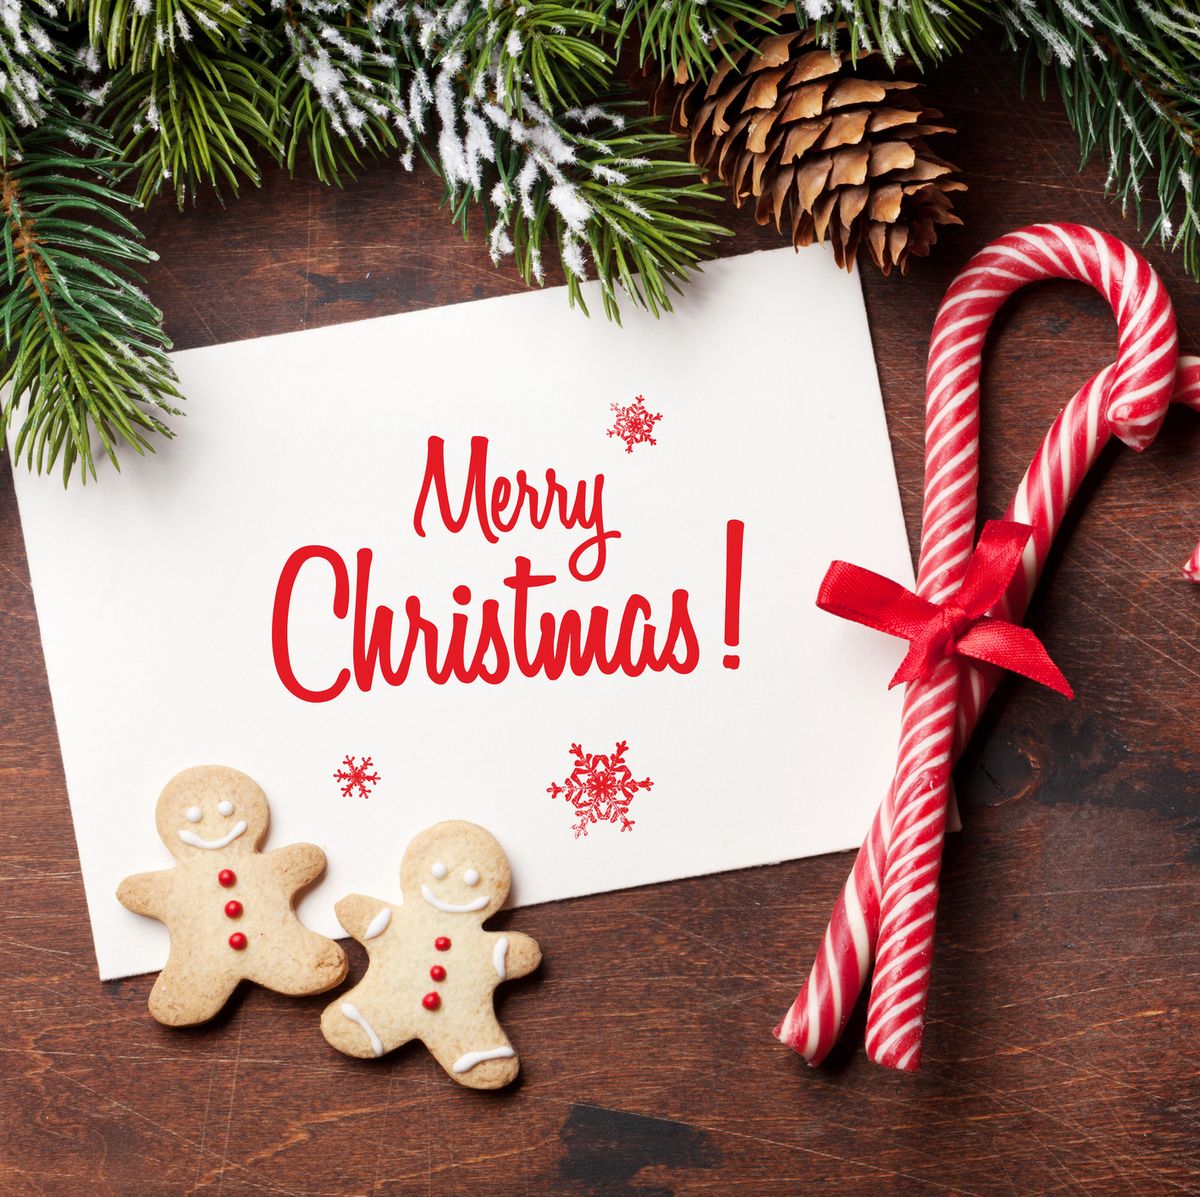 50+ Merry Christmas wishes, messages, greetingsr and quotes